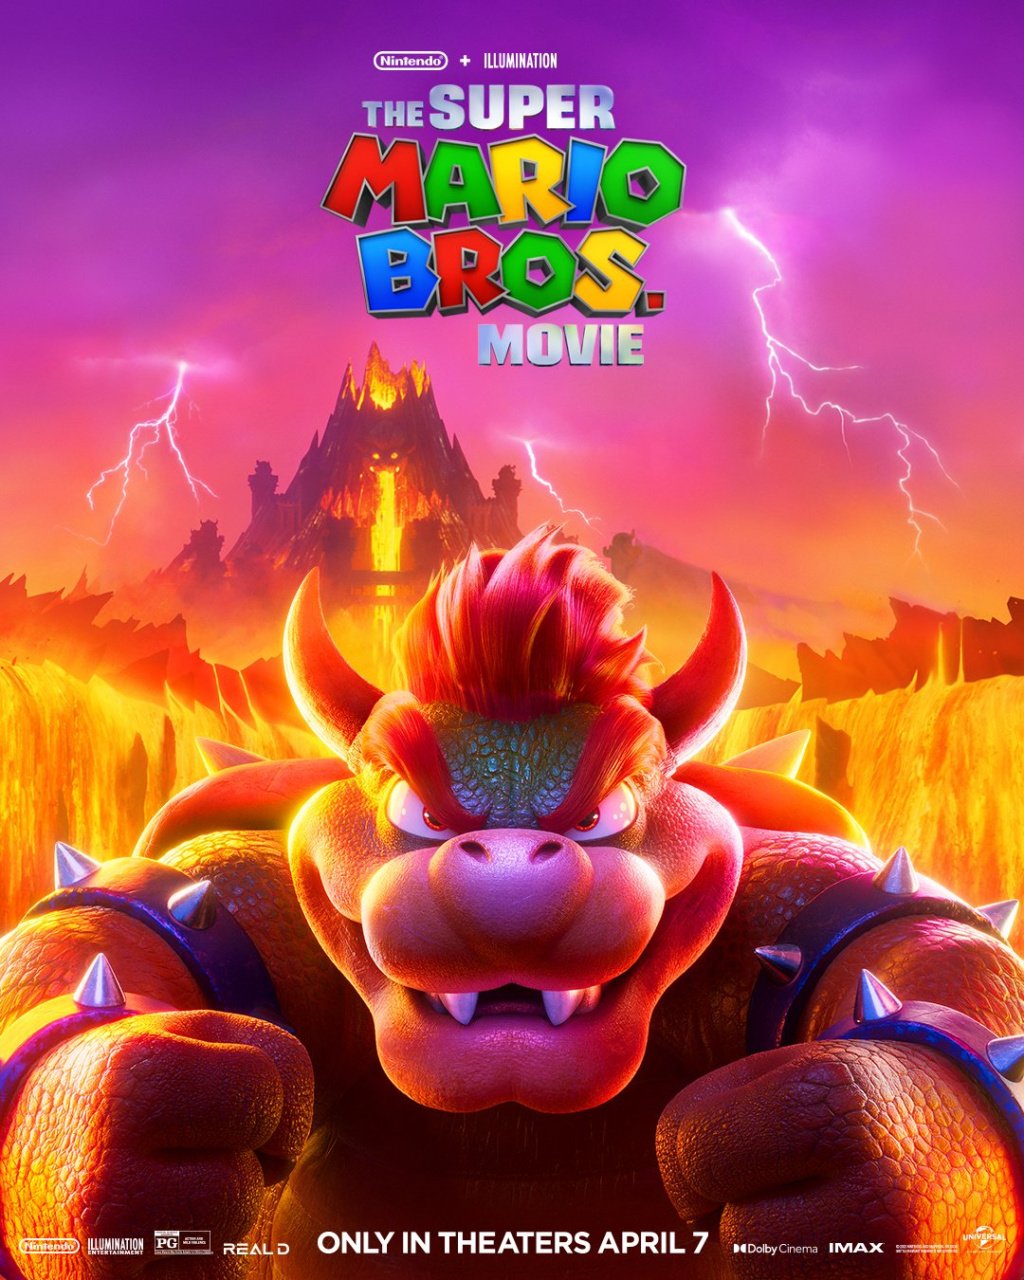 7 Super Mario MOVIE Posters for Peach, Bowser & More Released Online